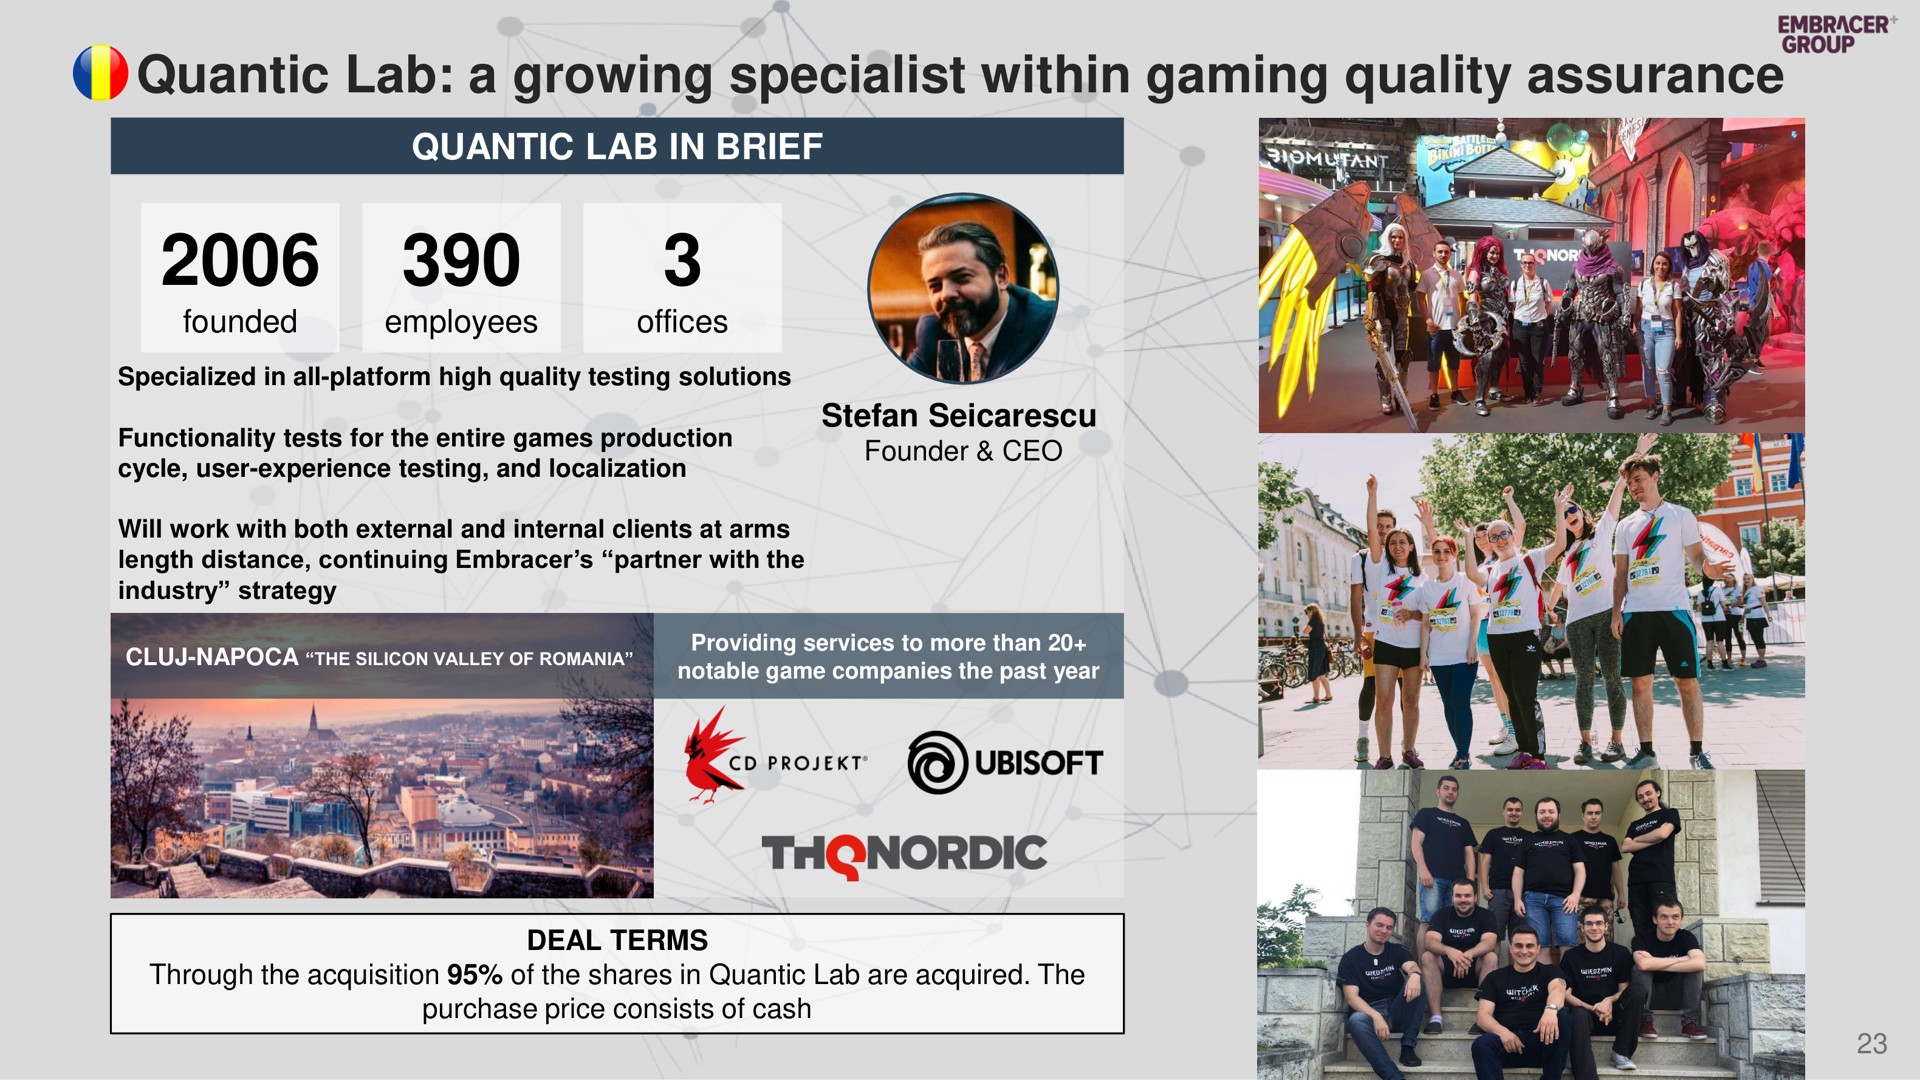 quantic lab a growing specialist within gaming quality assurance | Embracer Group